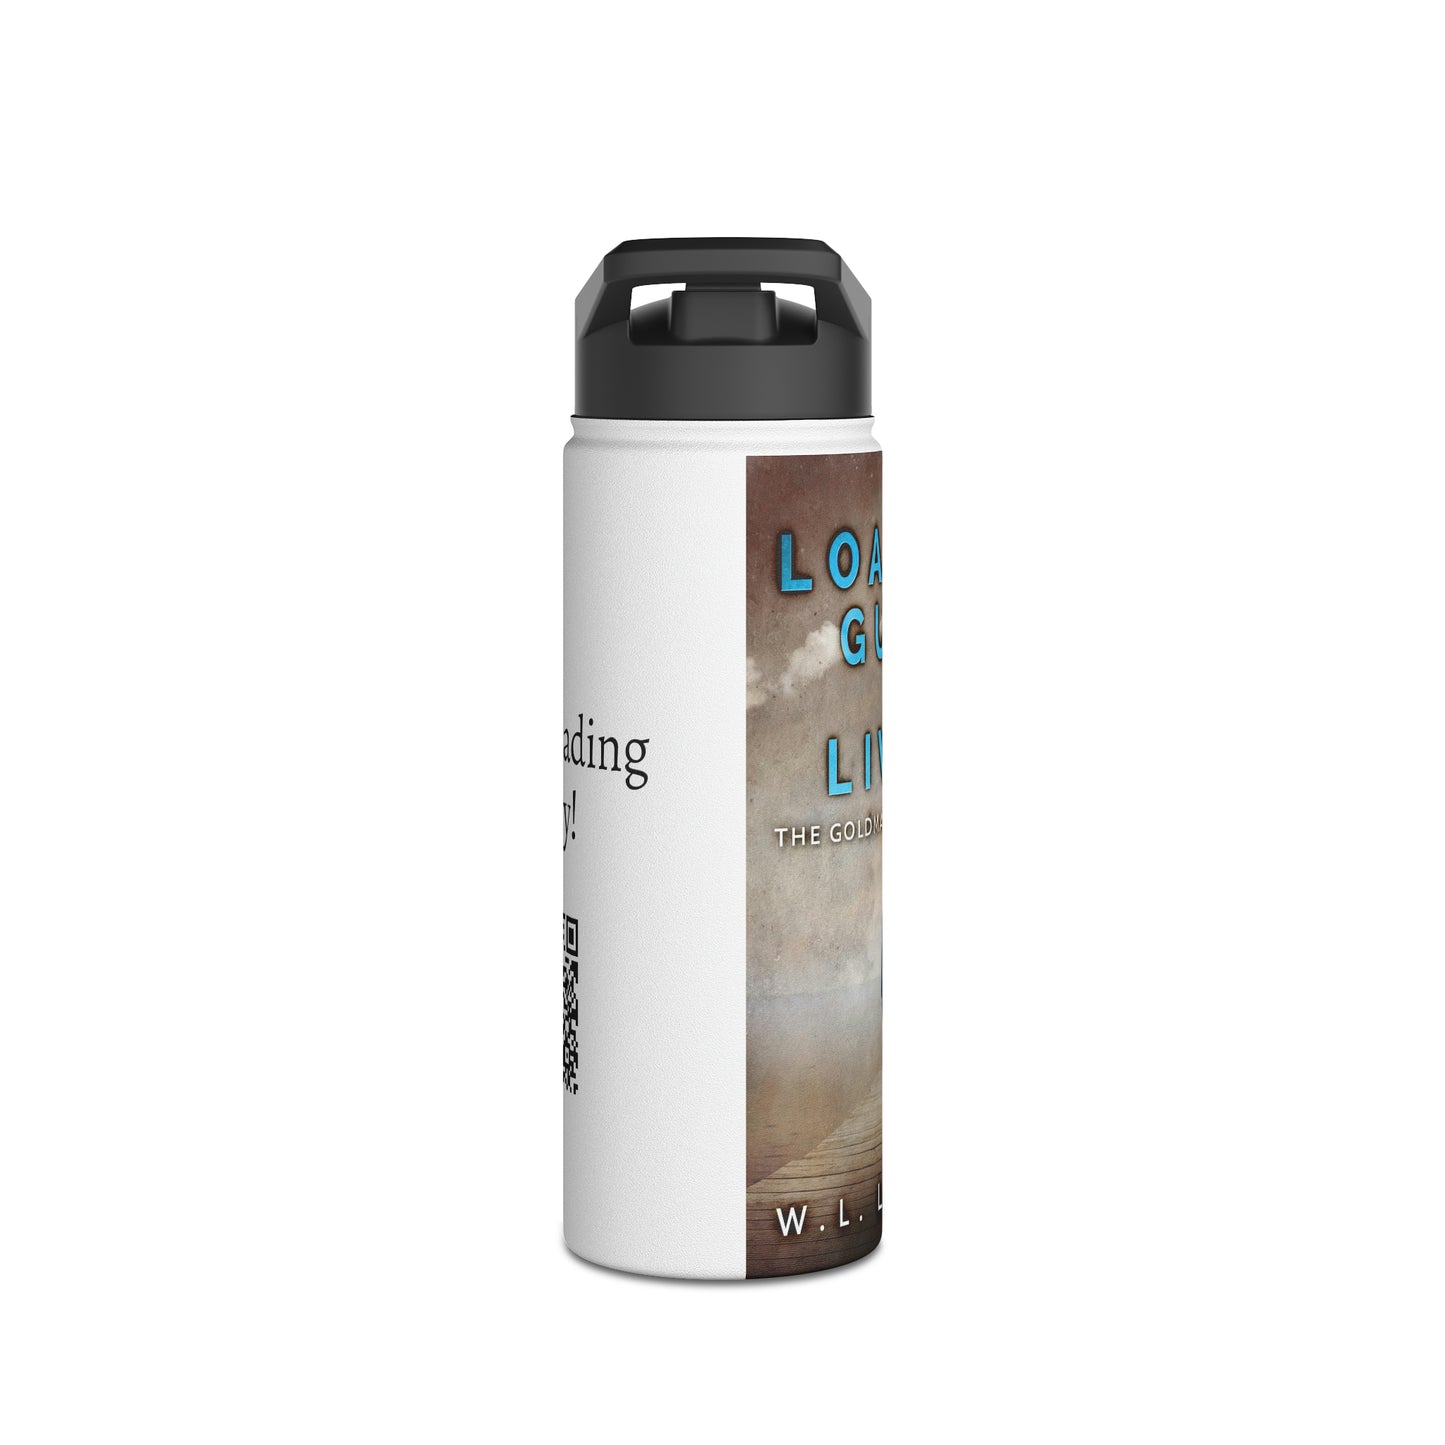 A Loafer's Guide To Living - Stainless Steel Water Bottle